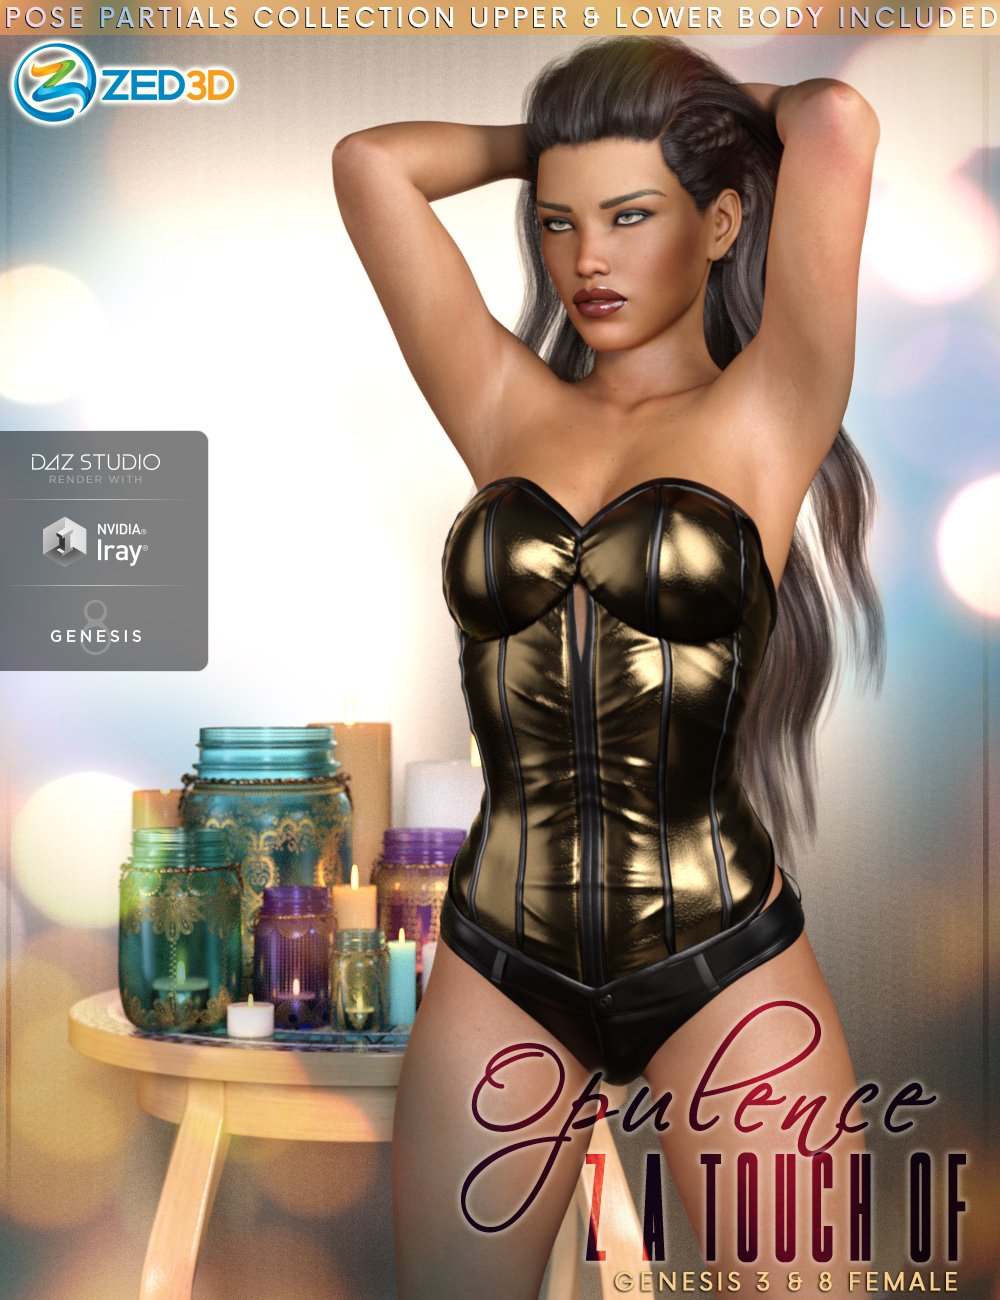 Z Touch Of Opulence – Poses And Partials For Genesis 3 And 8 Female